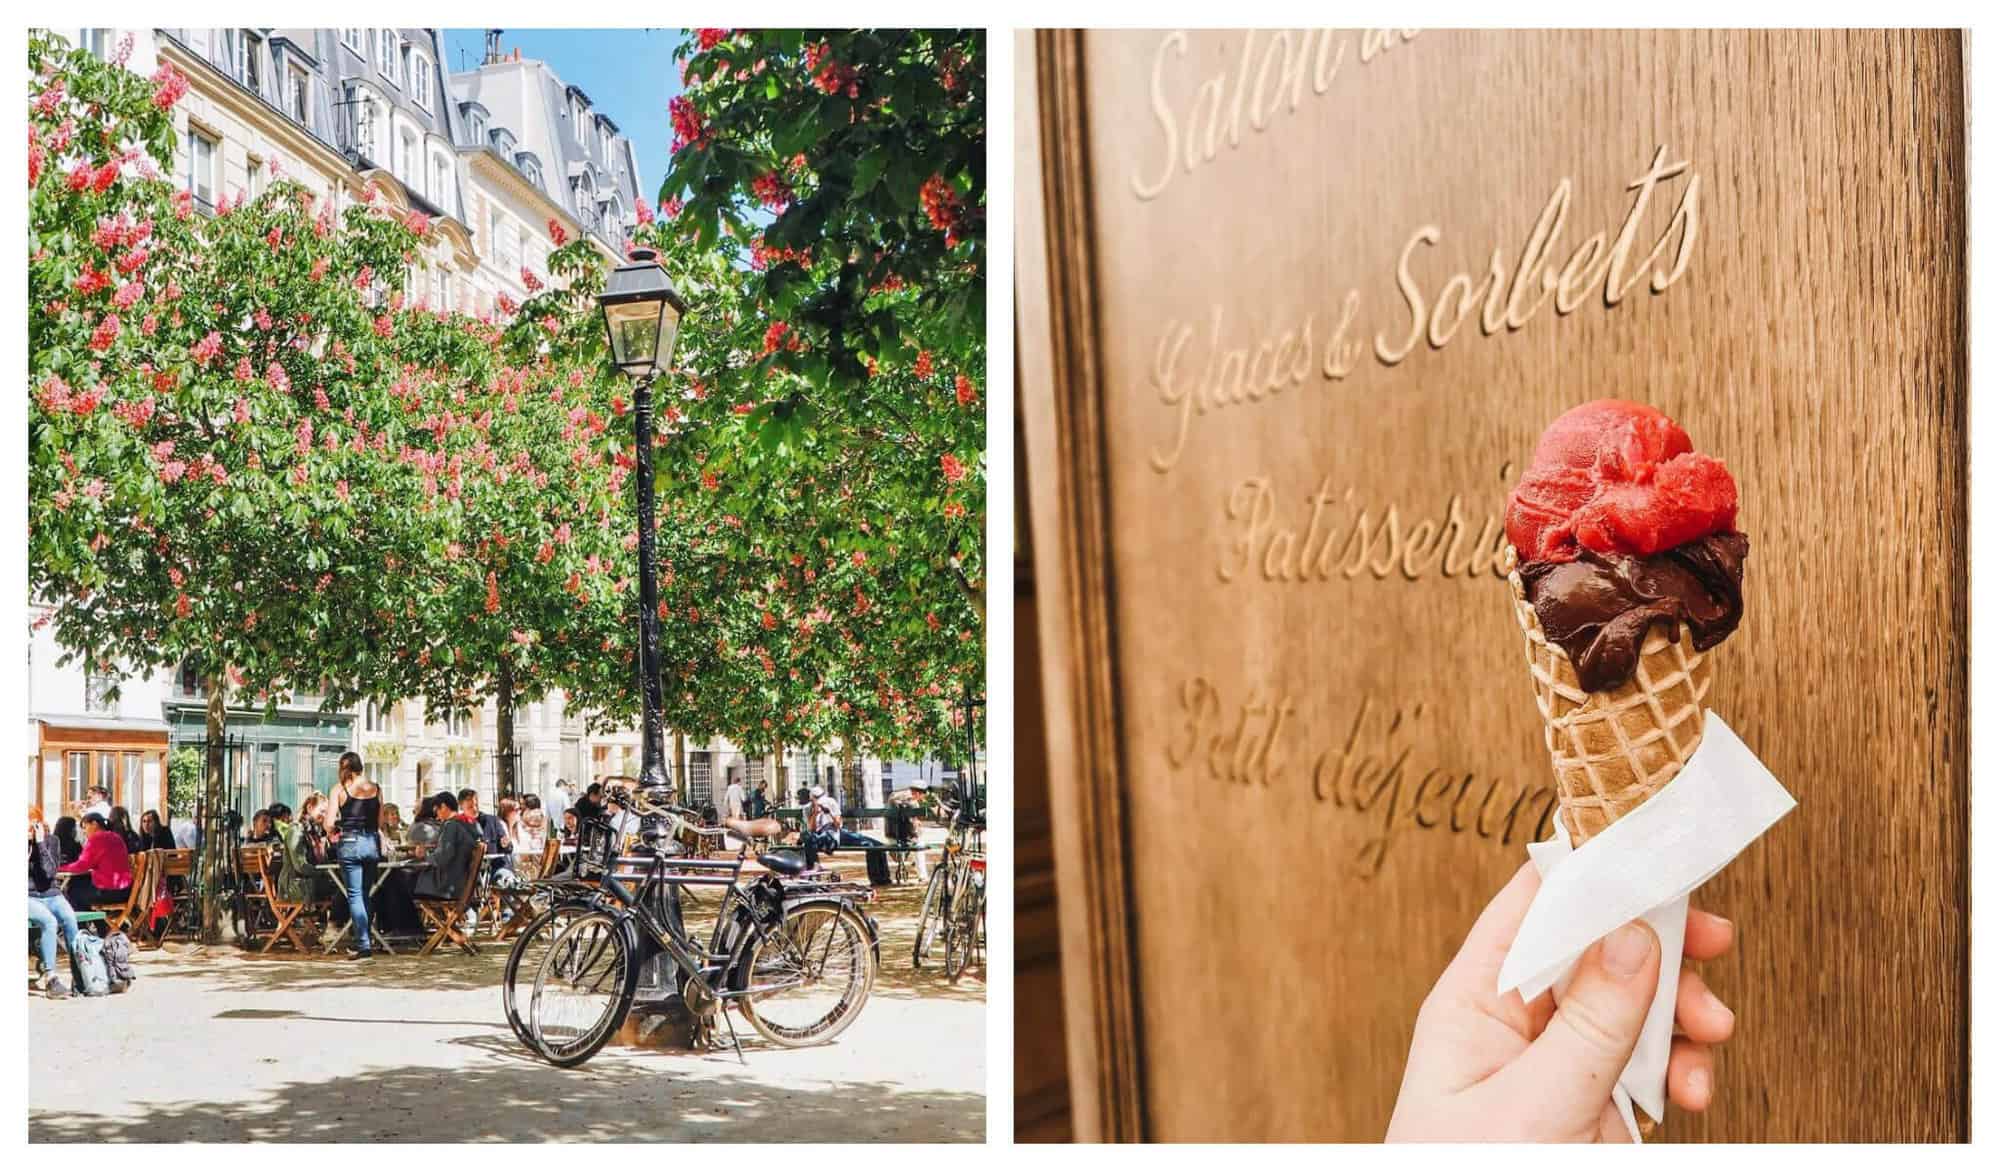 (Left) A bike leaned against a black lamppost in the middle of a busy plaza underneath a green tree with pink flowers. / (Right) A person holds an ice cream cone with one red scoop and one brown scoop. 